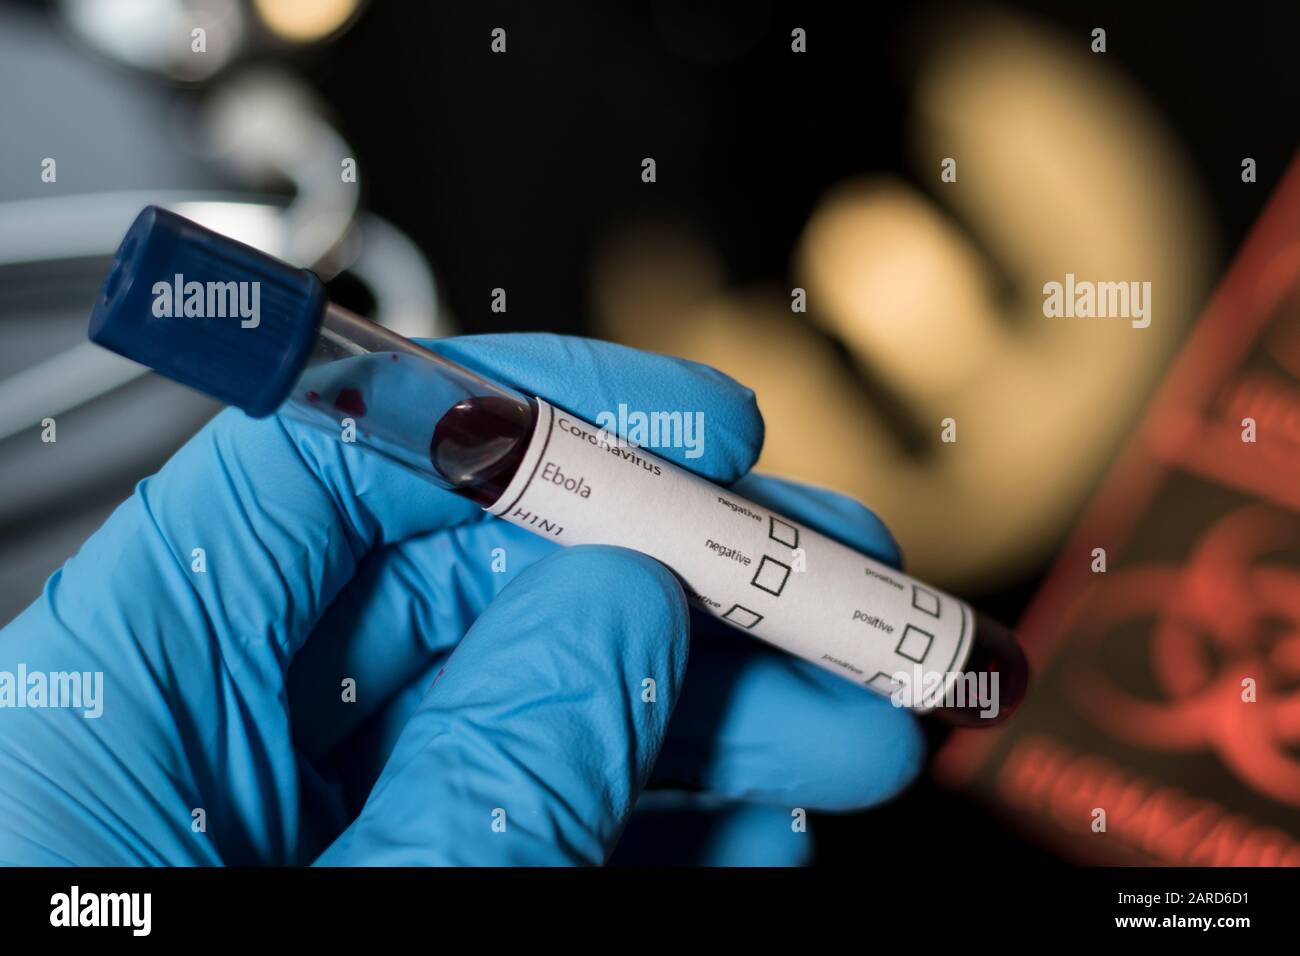 Blood sample test for disease and virus spread to humans. Global pandemic and flu outbreak. Laboratory research for coronavirus, Ebola, SARS, MERS and Stock Photo